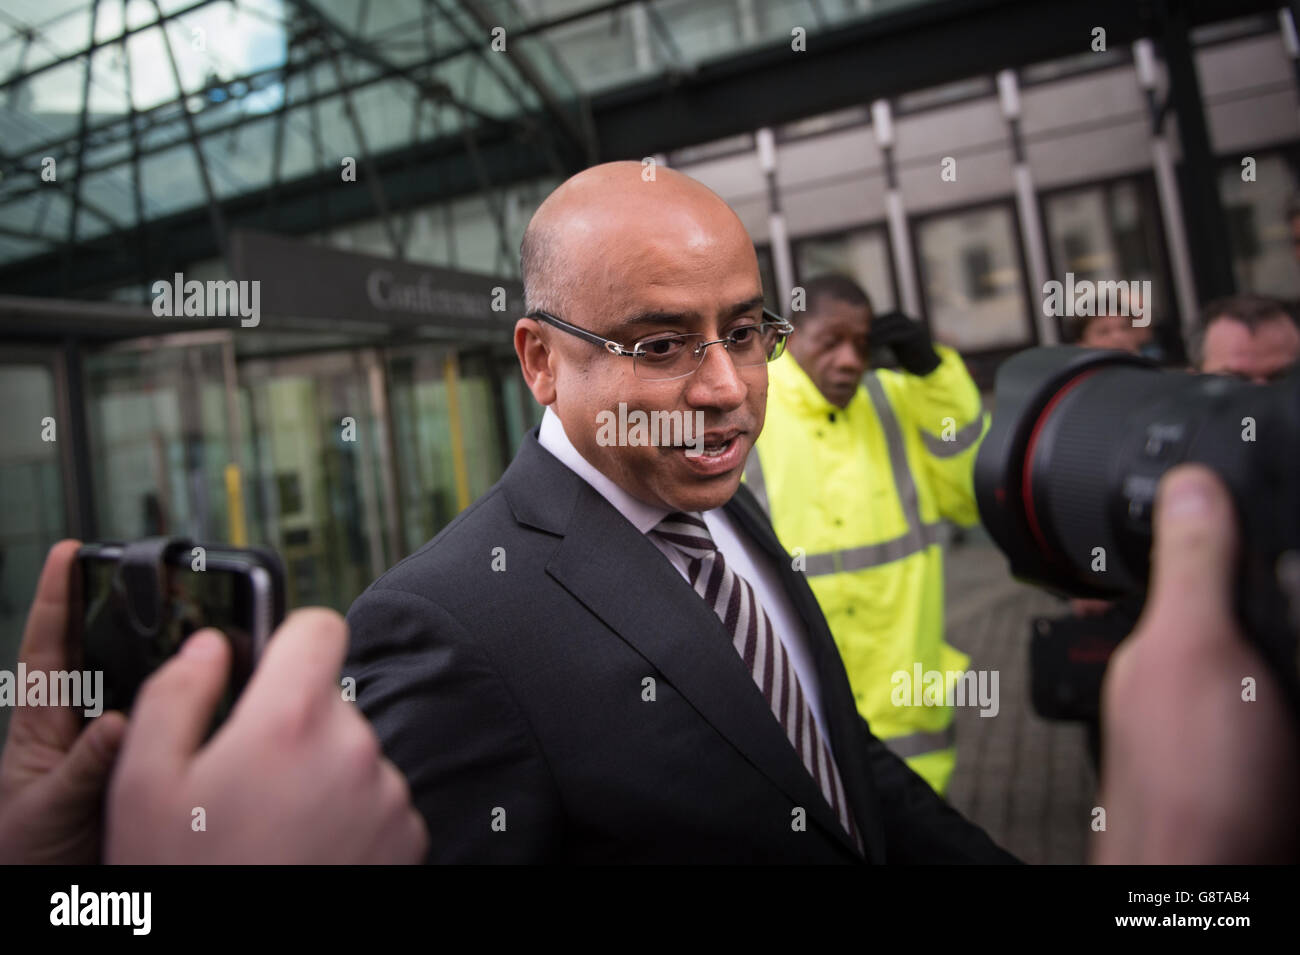 Sanjeev Gupta, the head of the Liberty Group, arrives at the Department for Business, Innovation & Skills in London for talks with the Government over the prospect of taking over the loss-making assets of Indian giant Tata. Stock Photo